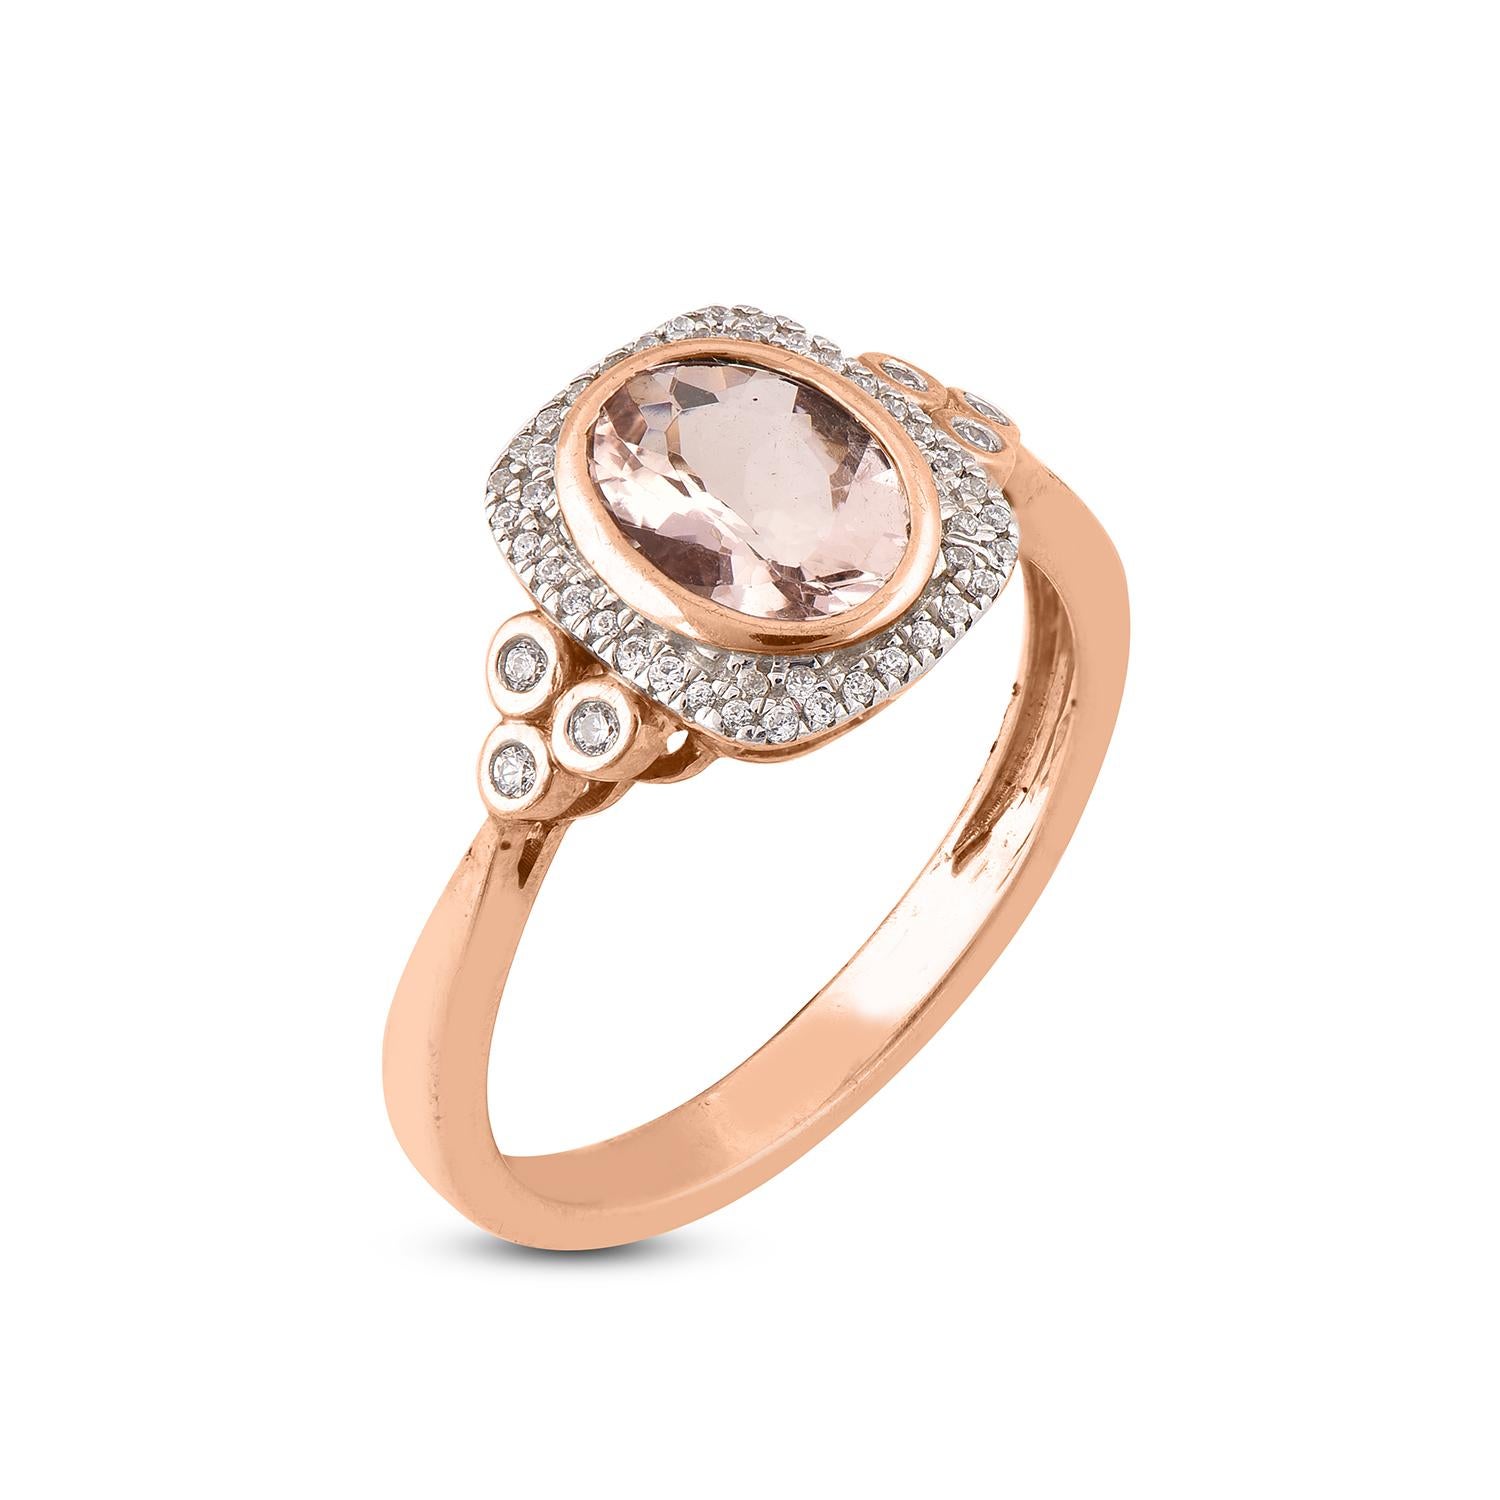 Beauty begins the moment you decide to be yourself. This stylish and designer ring expertly crafted in 14 karat Rose Gold with 1 oval shape morganite and 48 round diamond with a trilogy of diamonds on each shoulder and lines on frame set in prong